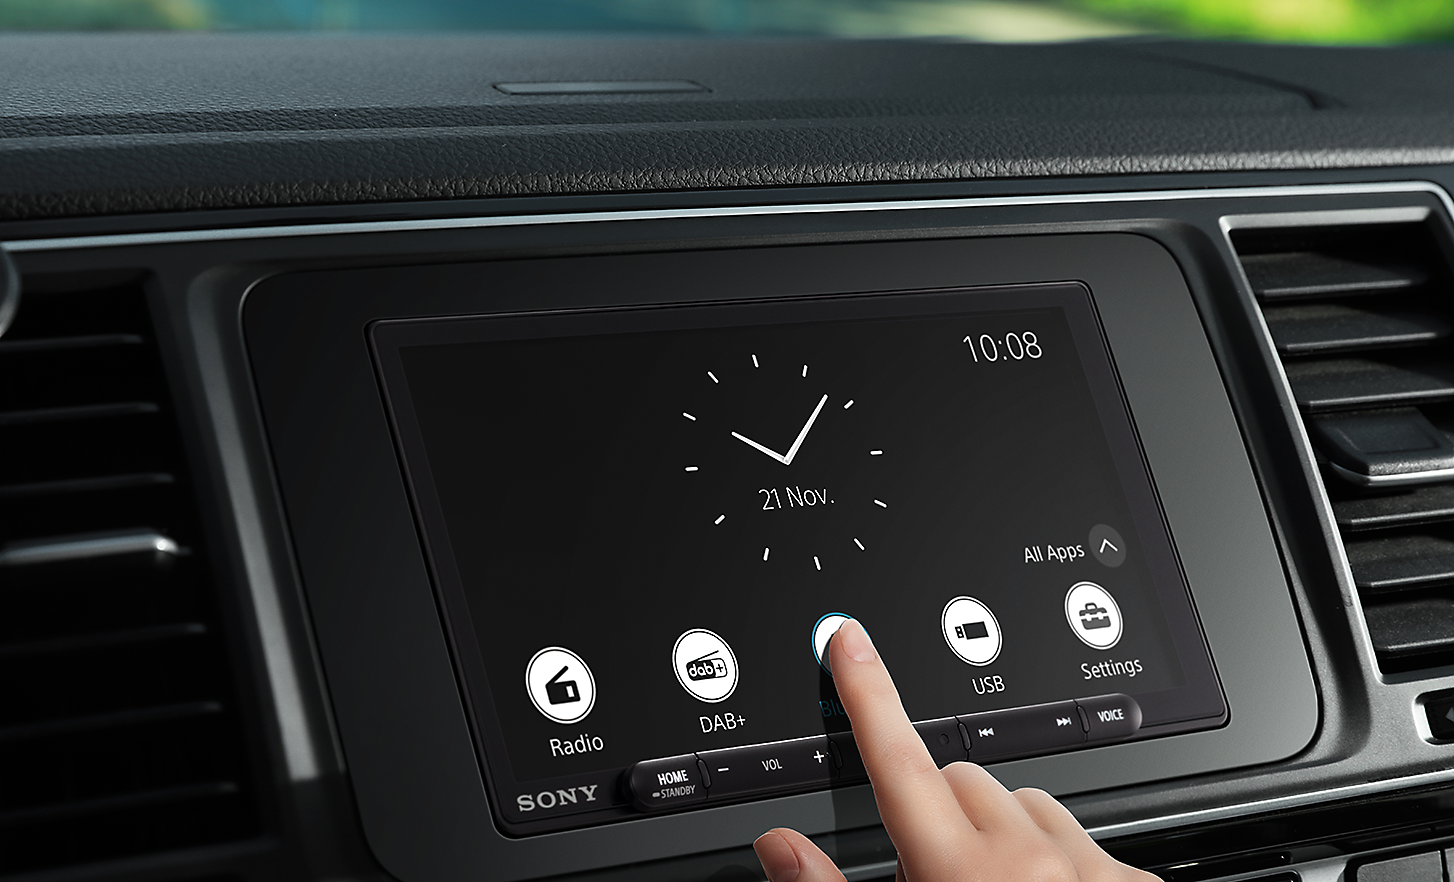 Image of the XAV-AX6050 in a dashboard with a person touching the screen with one finger